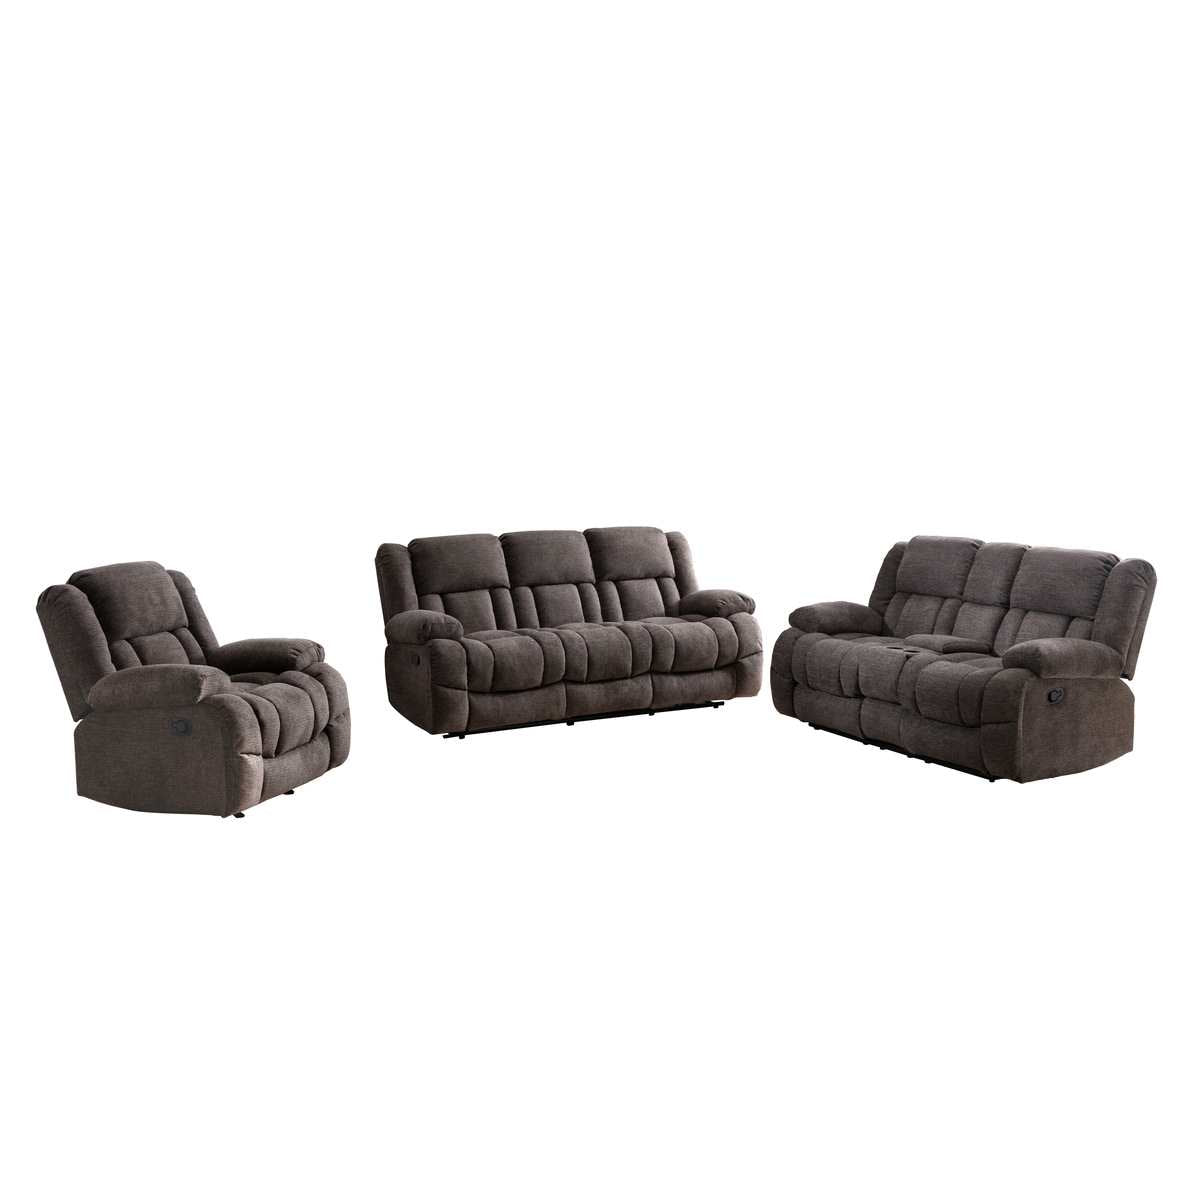 Presley Reclining Collection 99928GRY